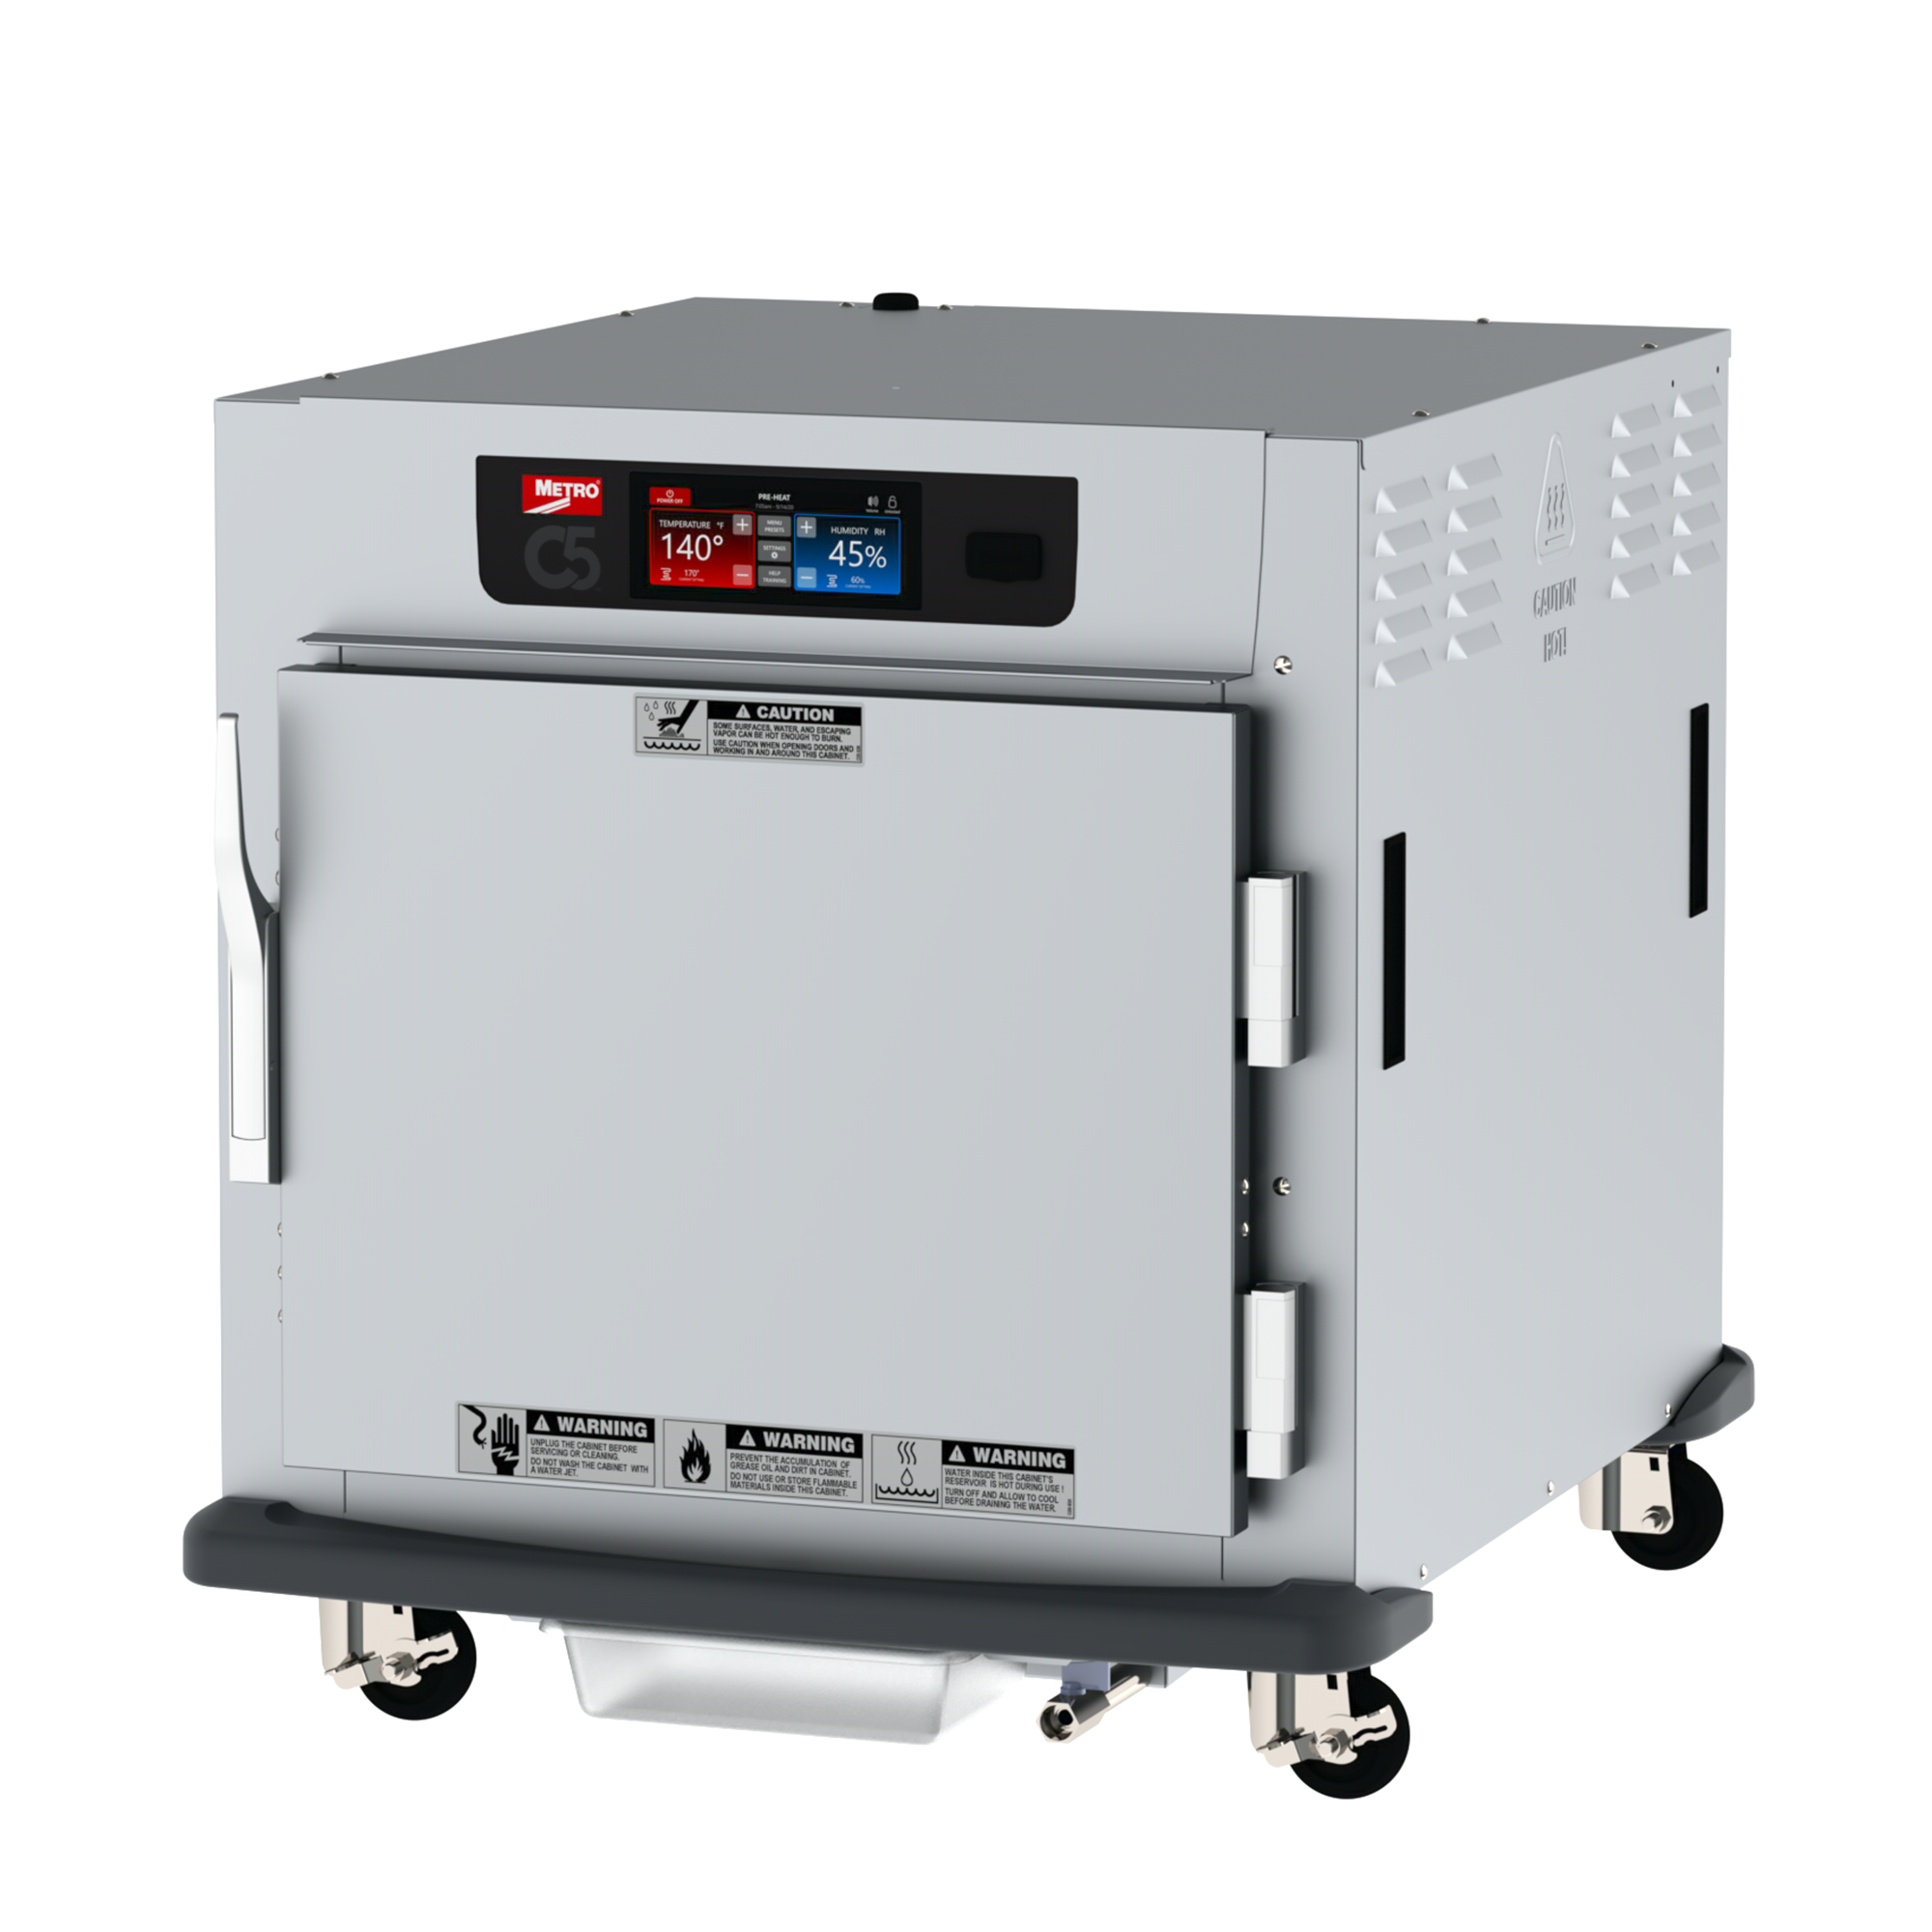 Metro C593L-SFS-UA Undercounter Mobile Heated Holding Proofing Cabinet